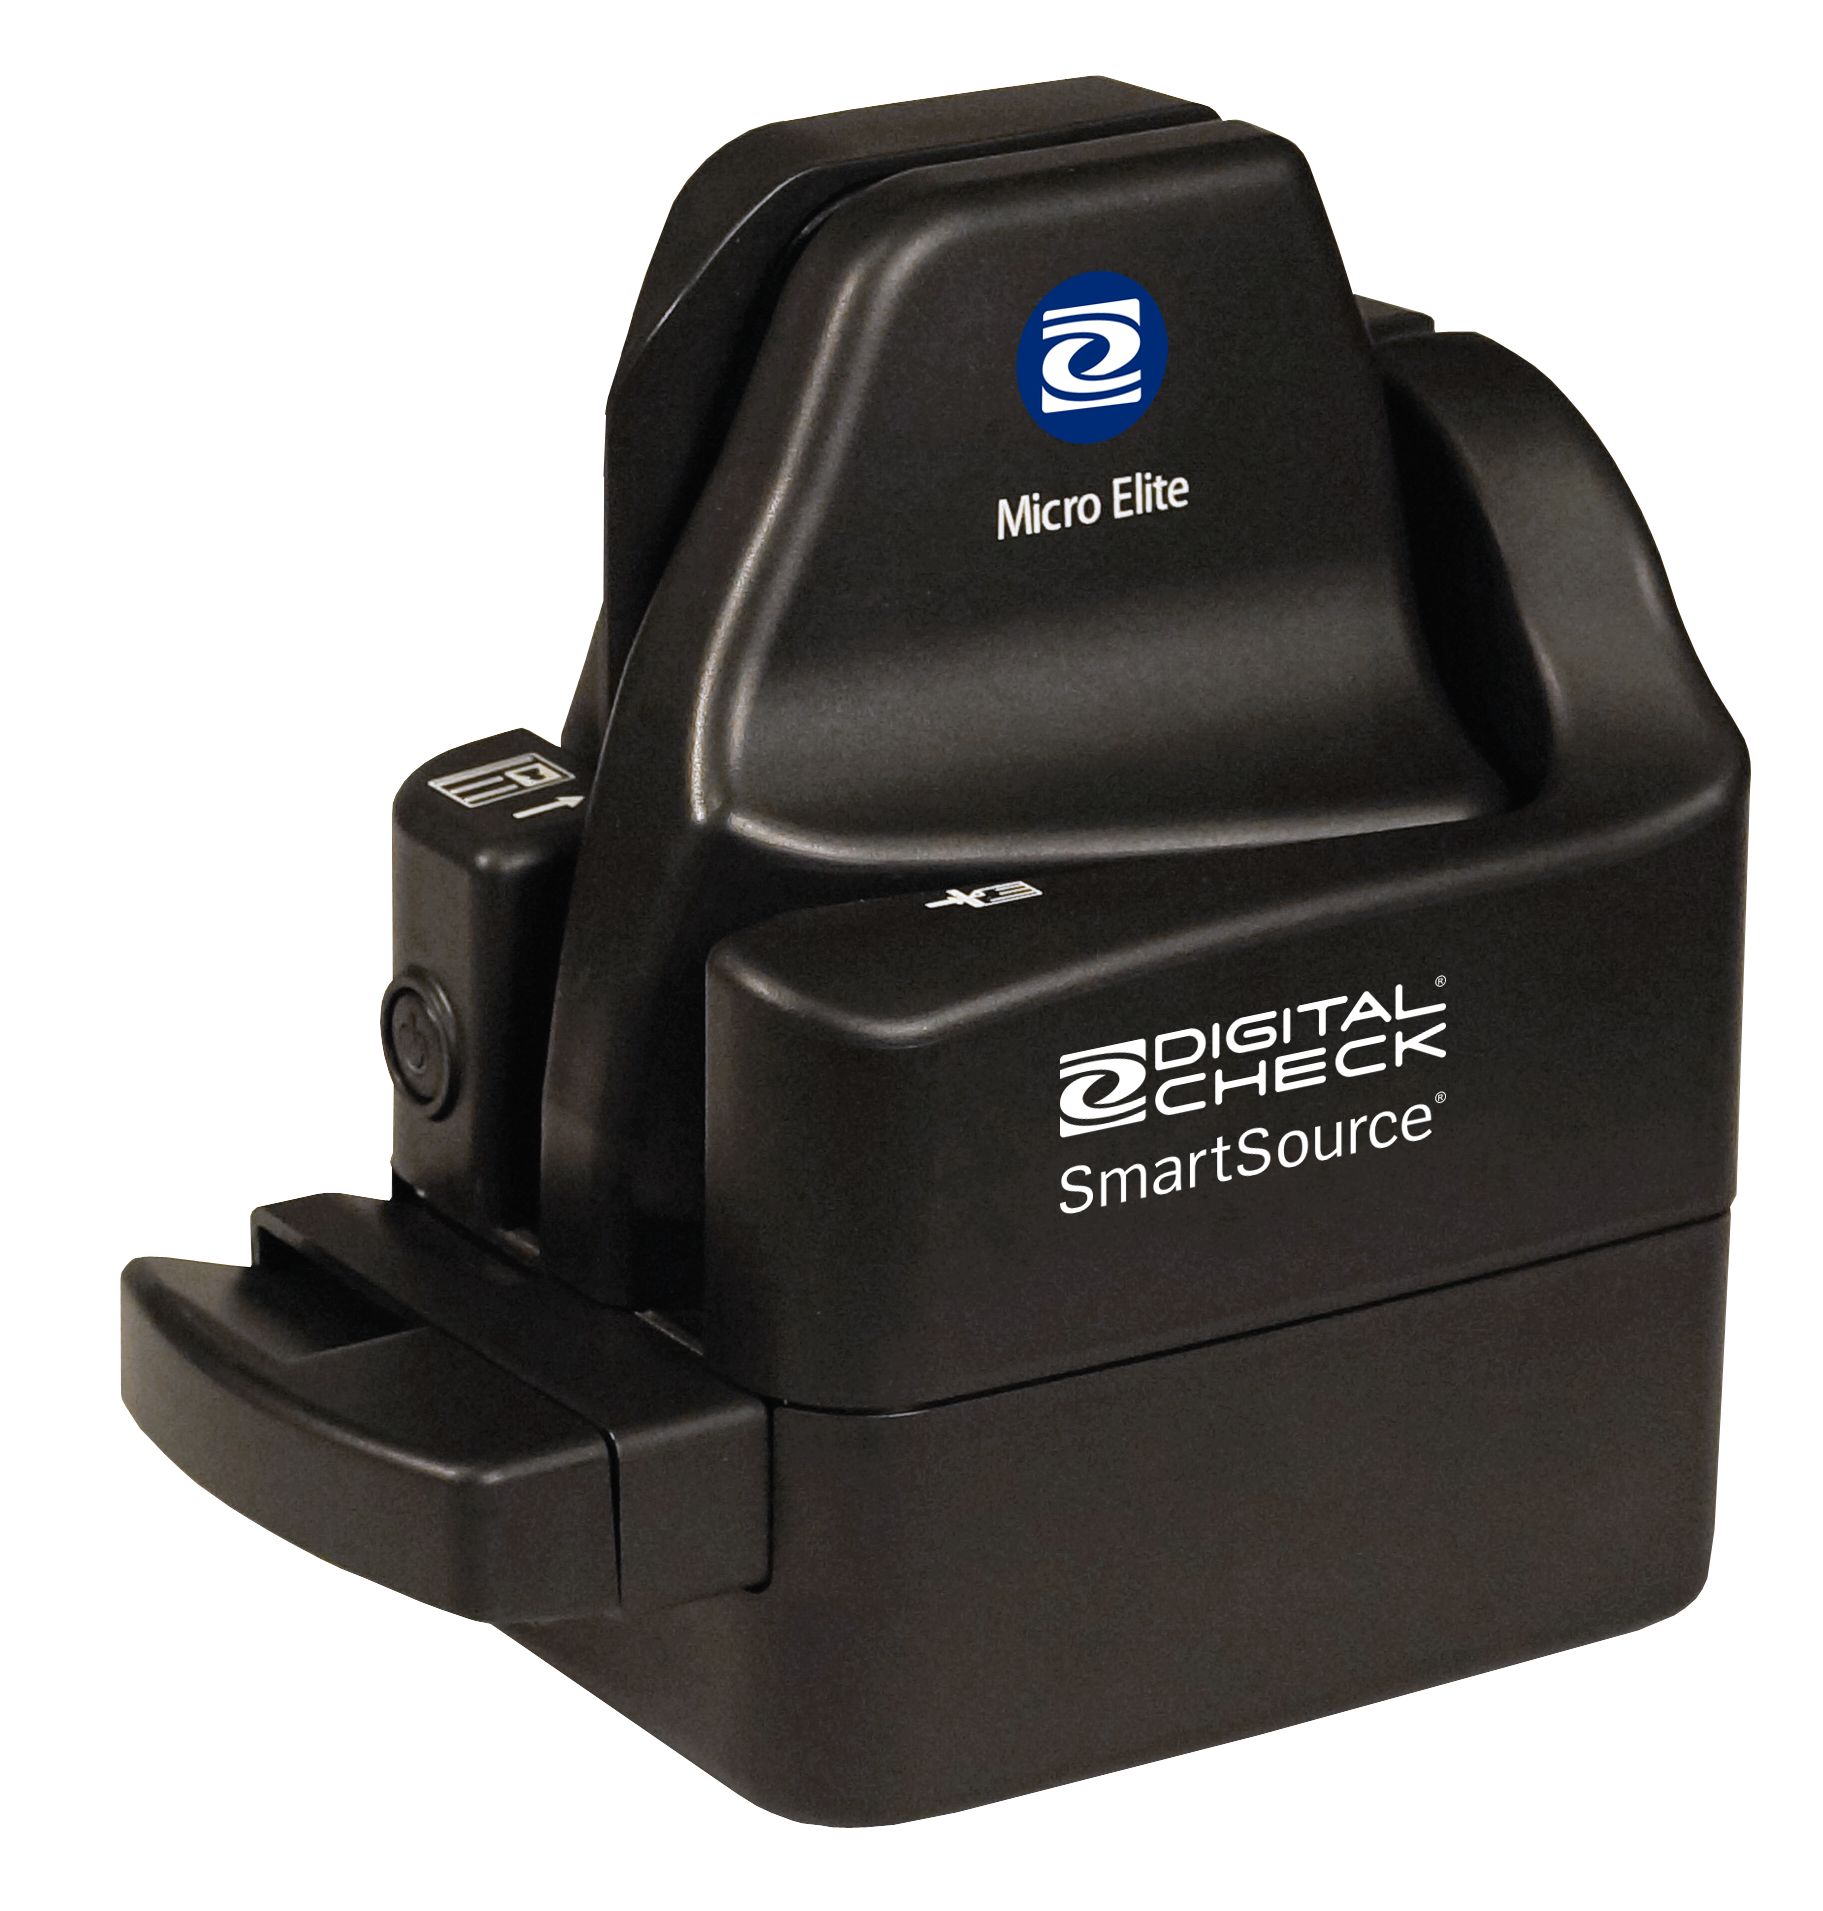 The SmartSource Expert Micro Elite check scanner is a network-ready version of the Micro Elite, with a compact form factor and more onboard processing power.